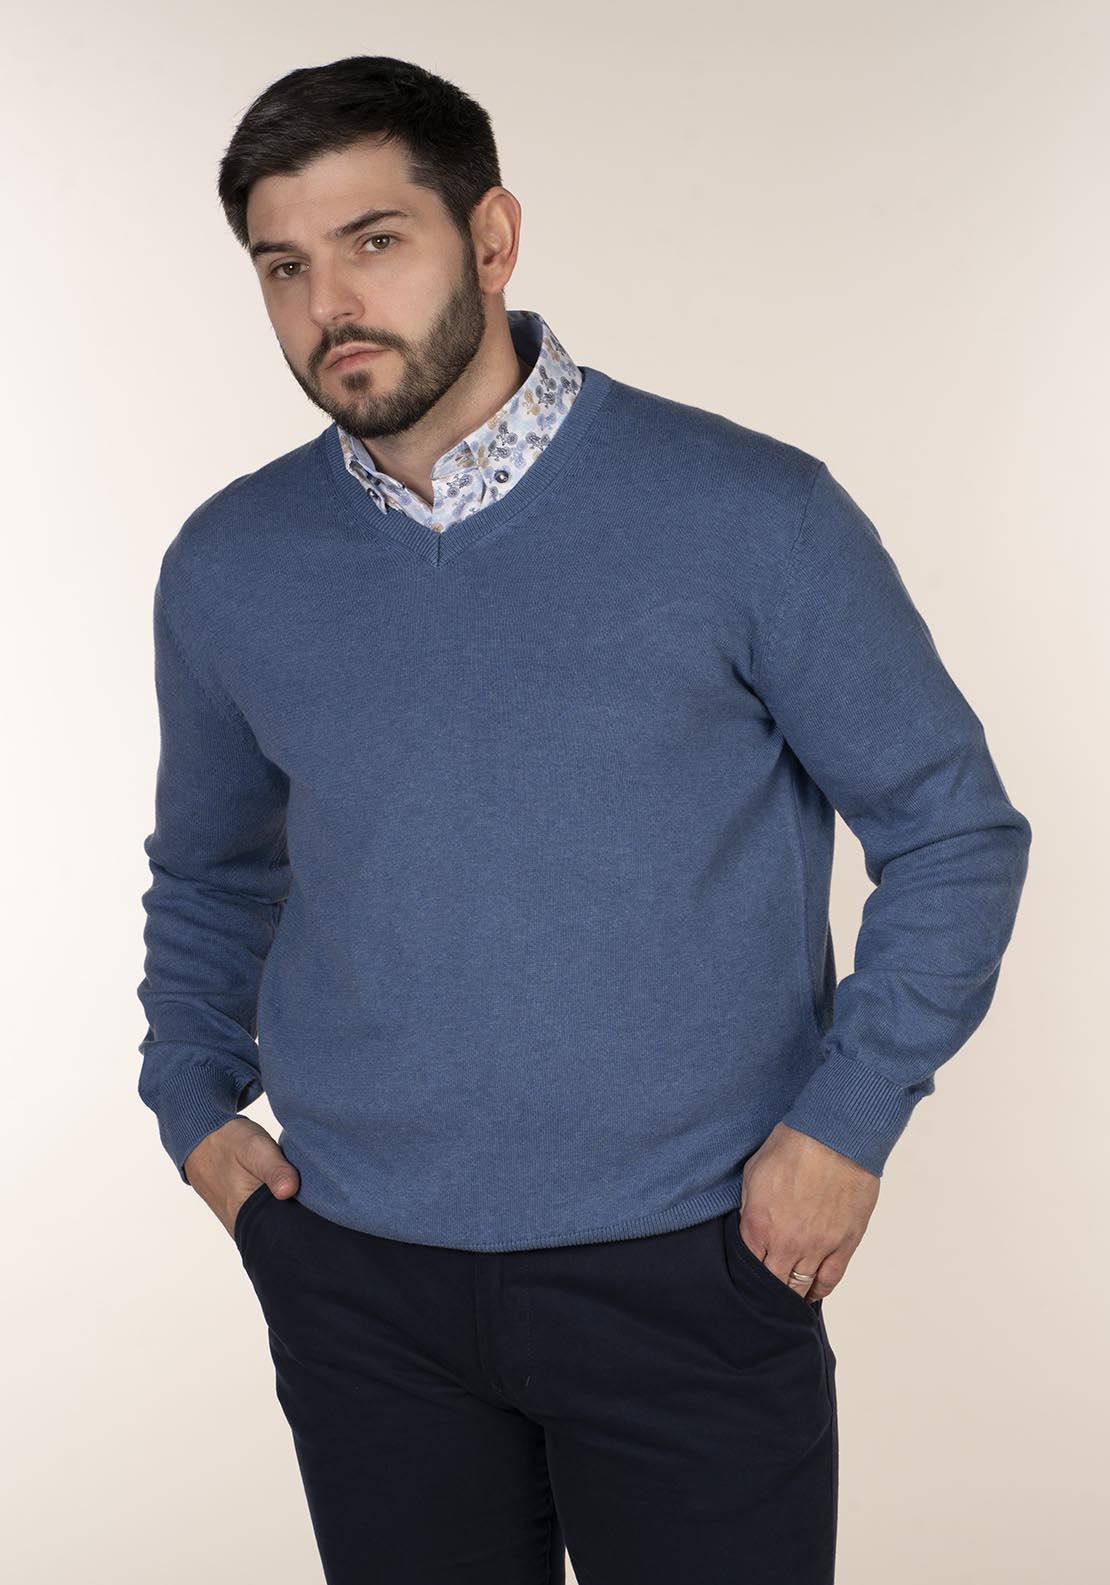 Yeats Plain Cotton V Neck Sweaters - Blue 3 Shaws Department Stores